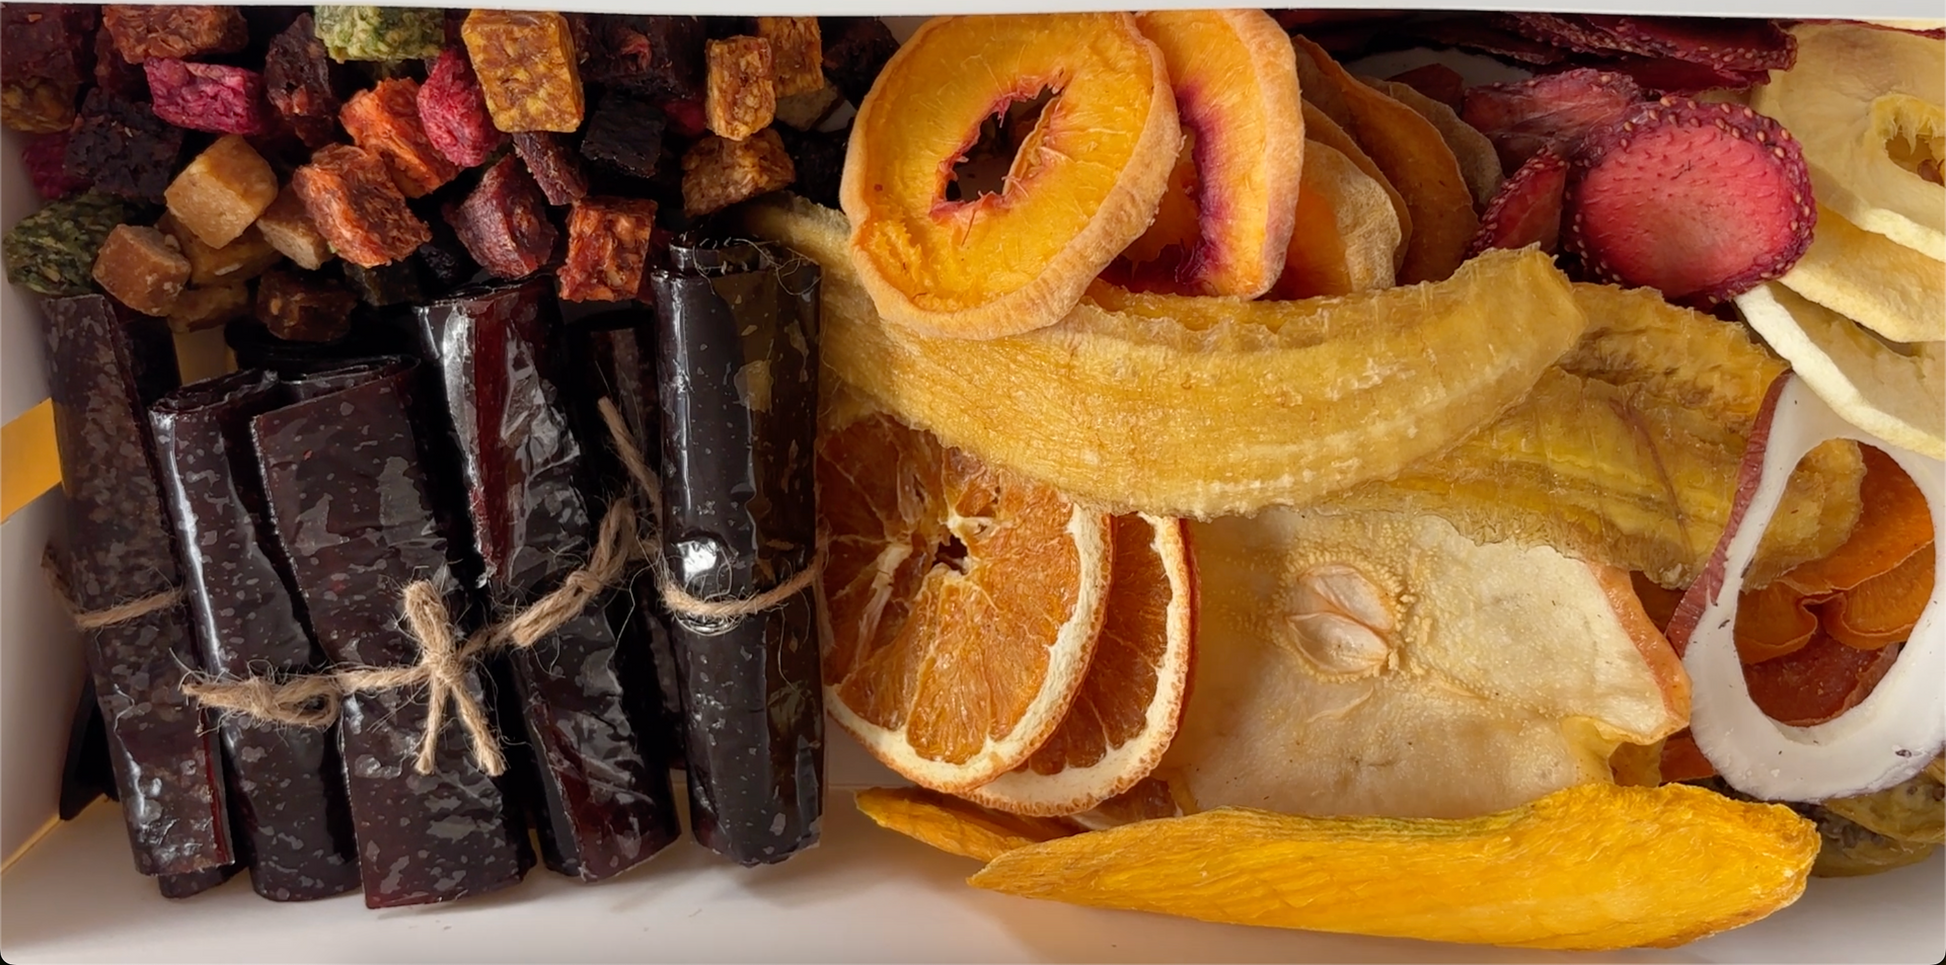 dried fruits and fruit leather